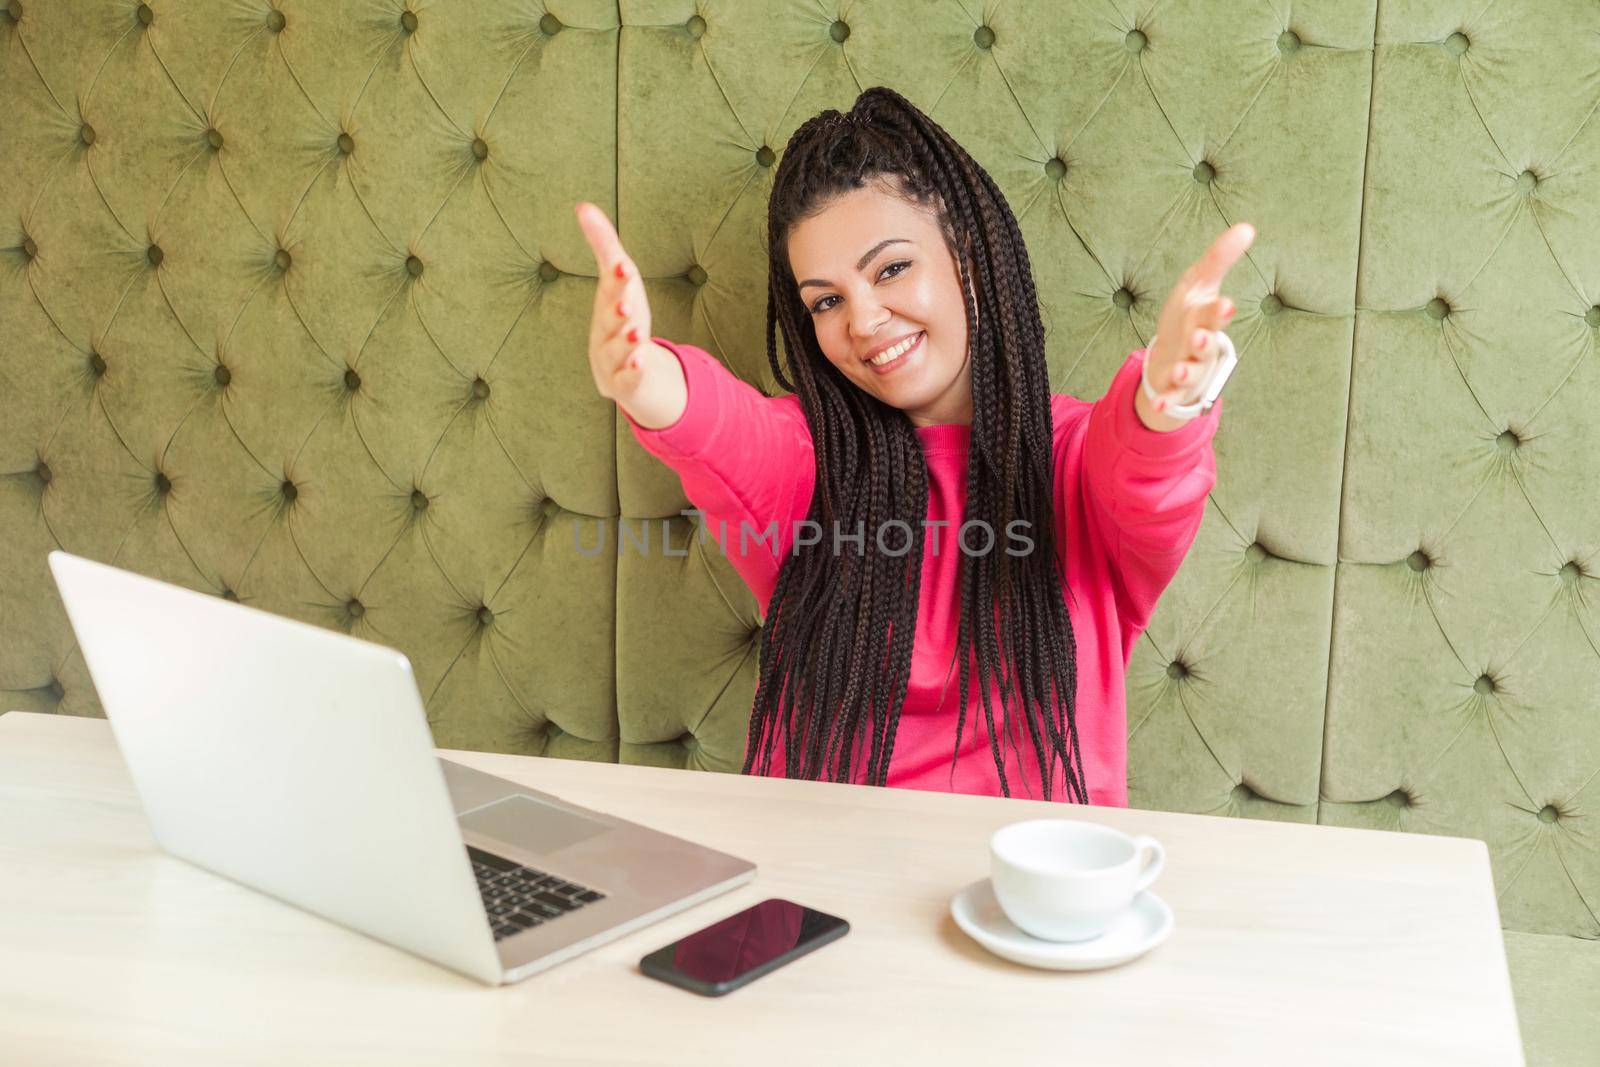 Portrait of lovely romantic young girl freelancer with black dreadlocks hairstyle are sitting alone in cafe and are ready hugging you with raised arms, toothy smile. Indoor, looking at camera